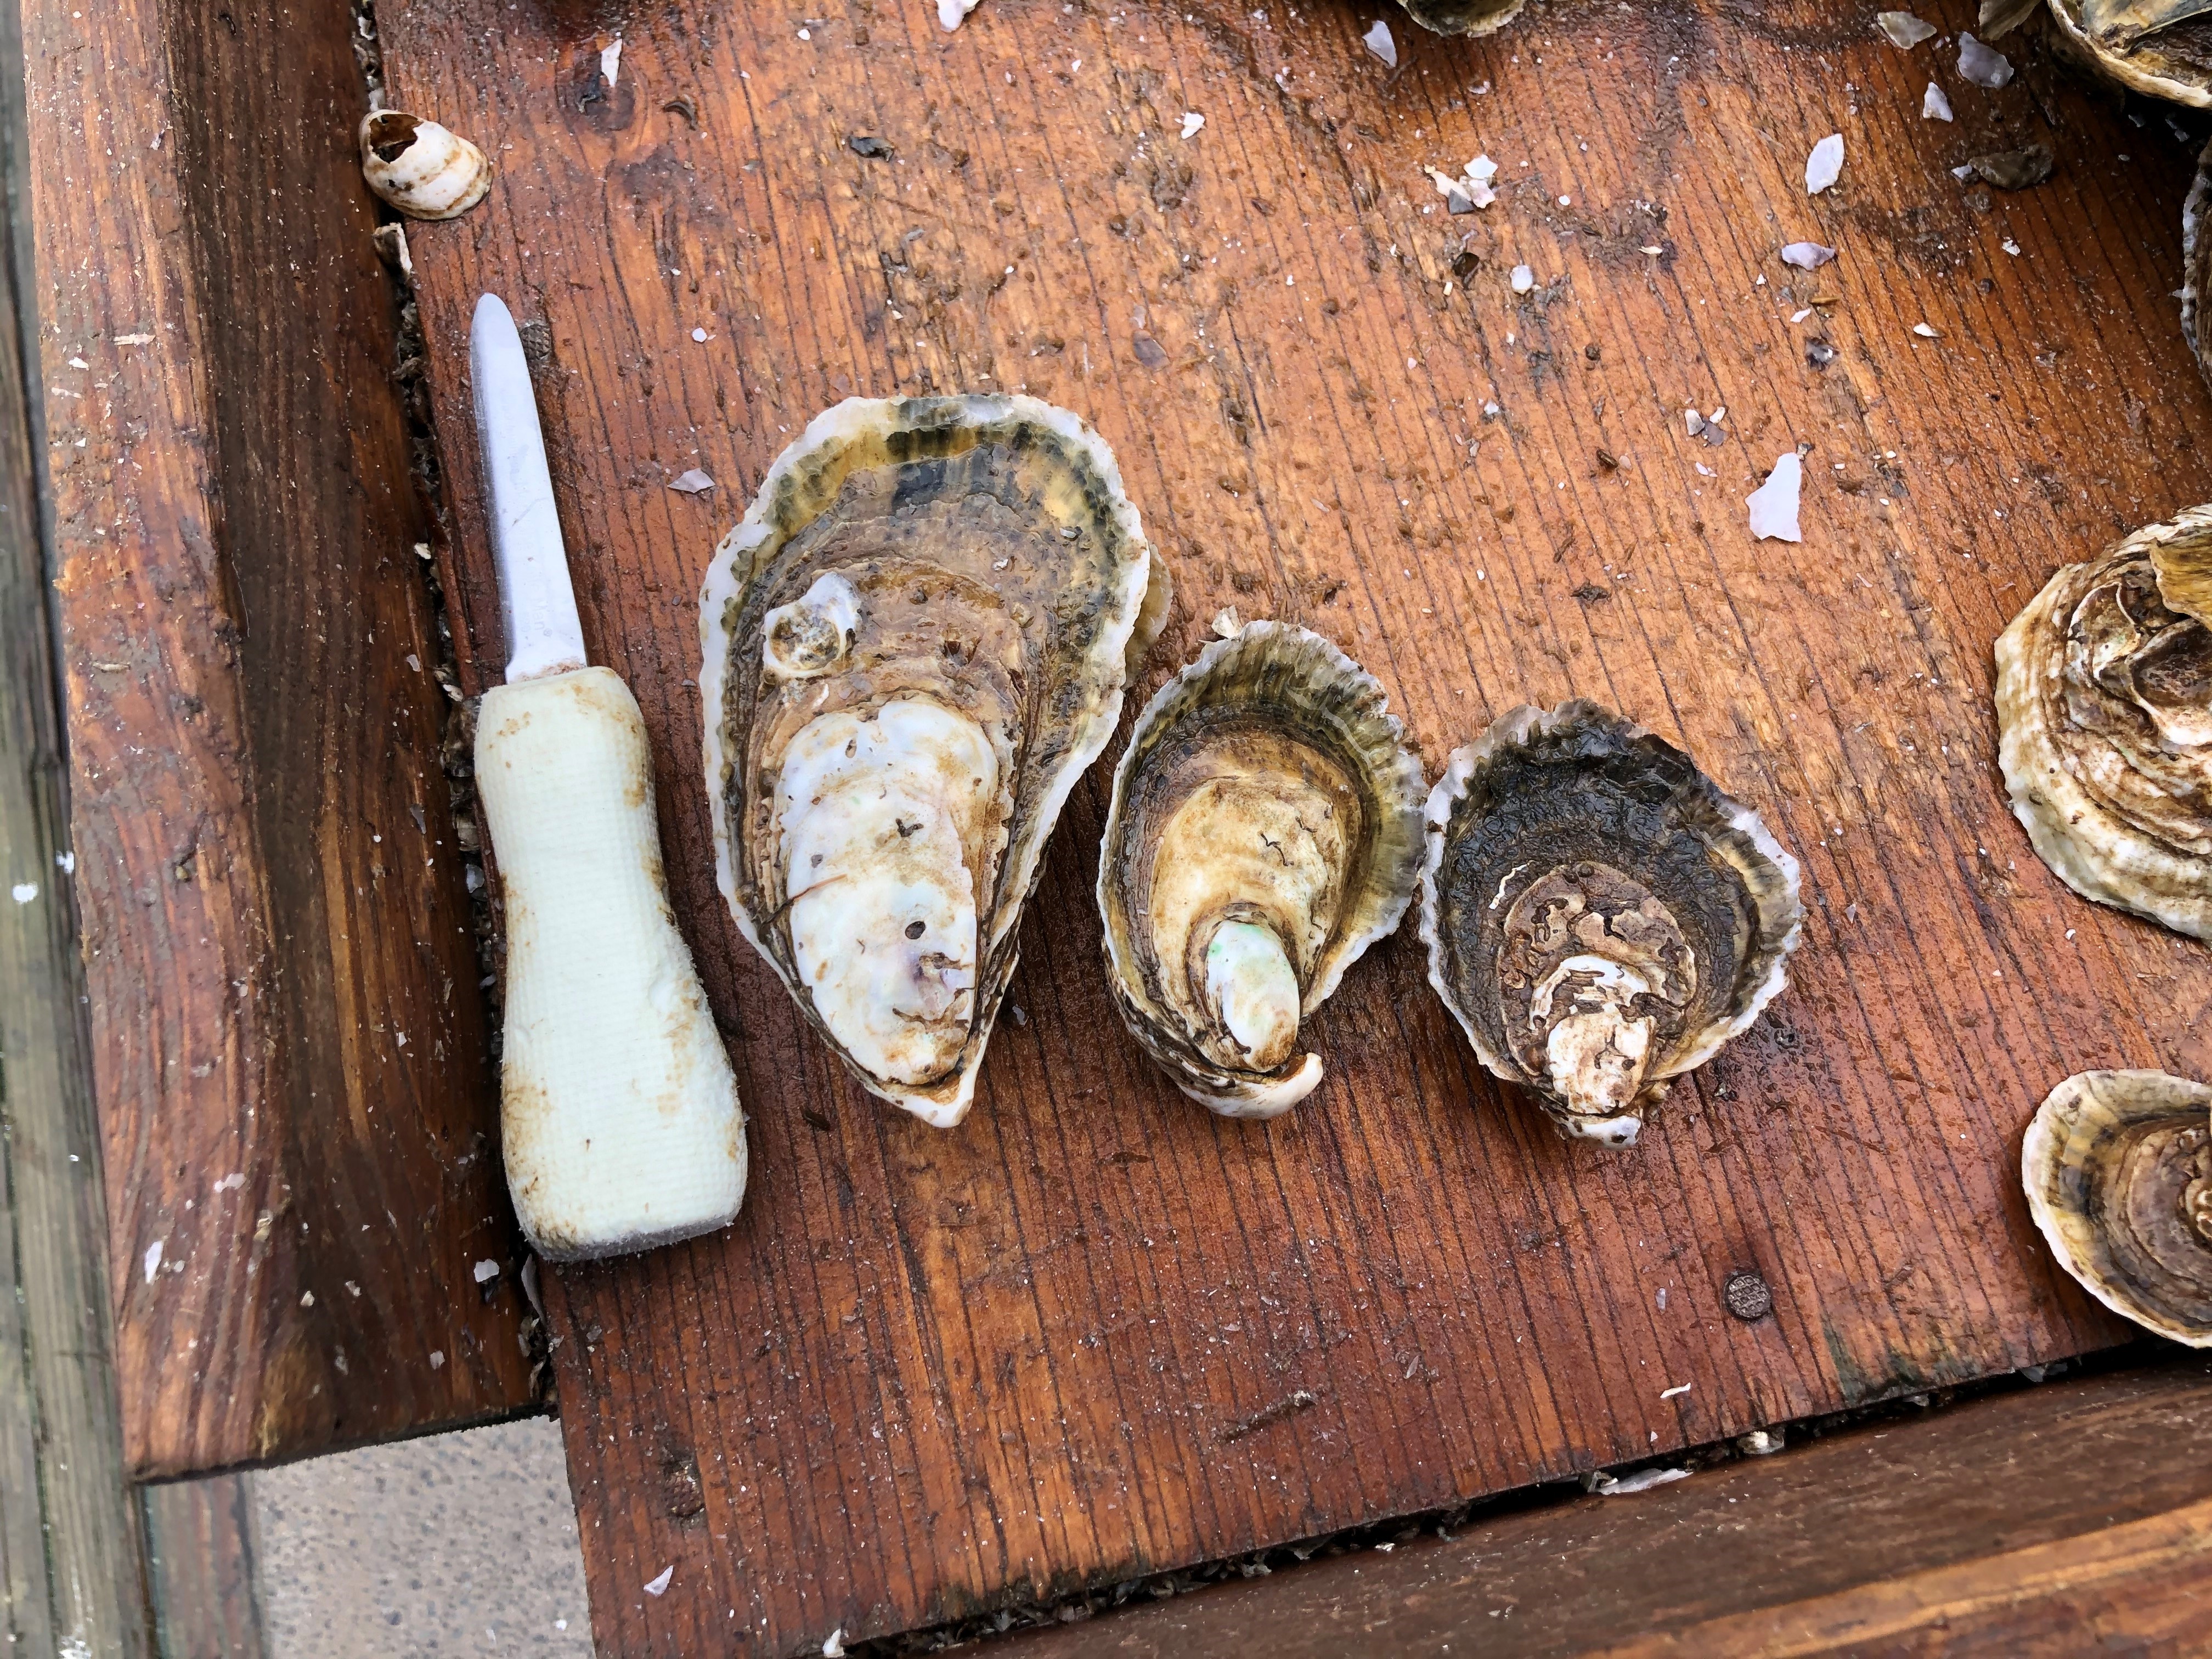 Oysters of varying size